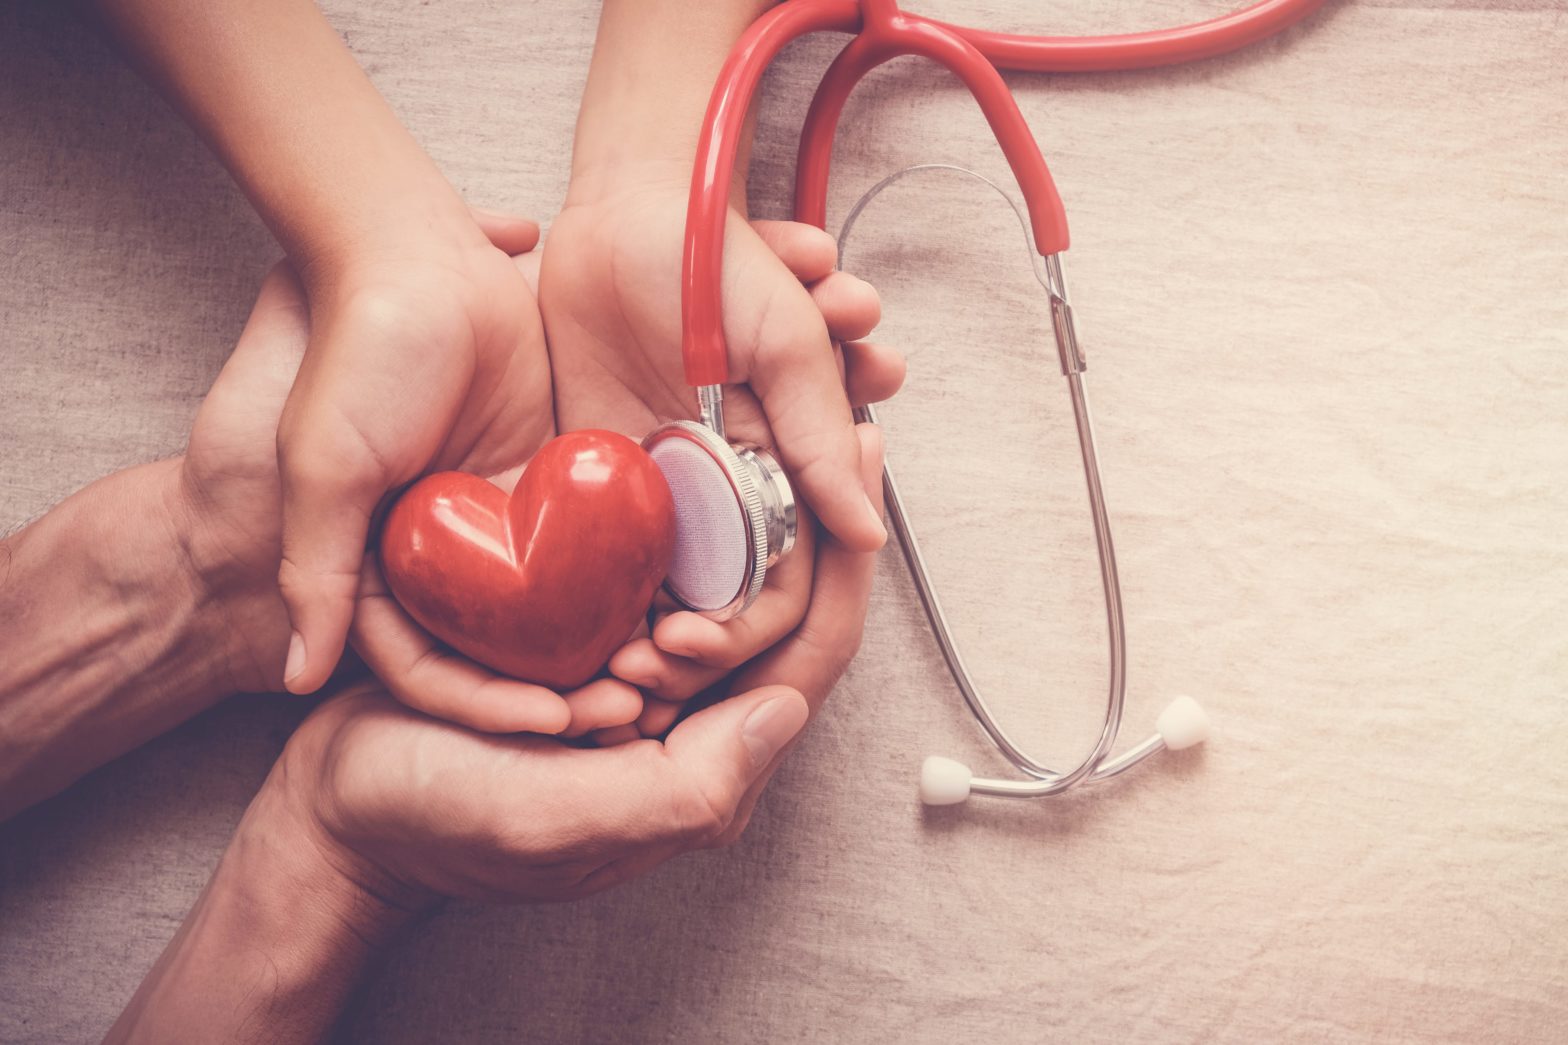 Keeping your heart healthy is something you can work on every day